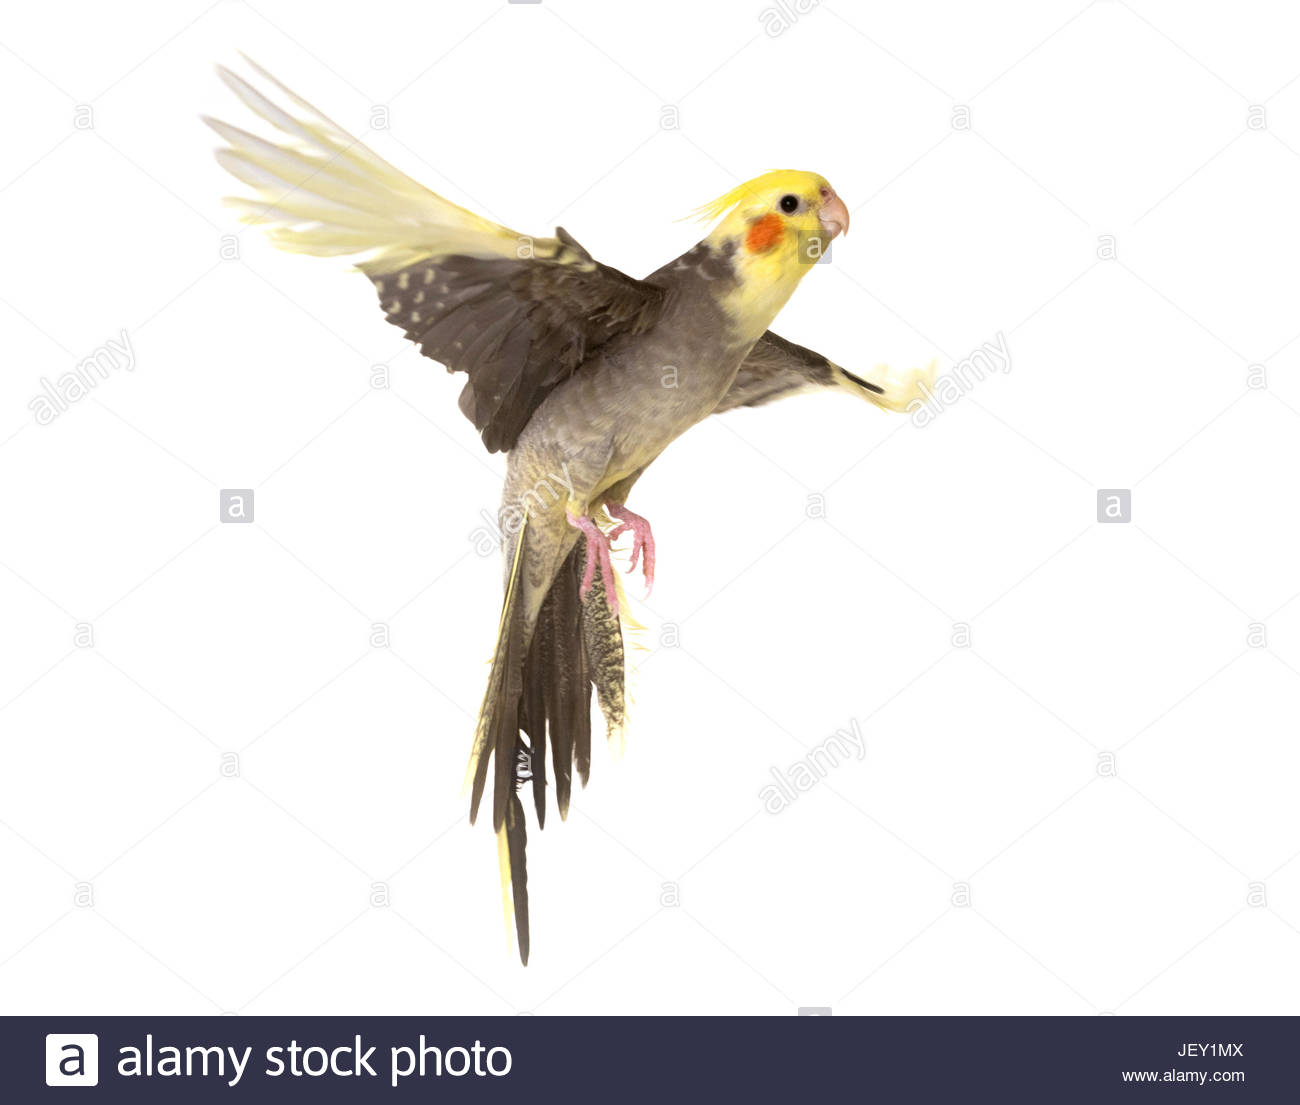 Young Cockatiel Flying In Front Of White Background Stock Photo